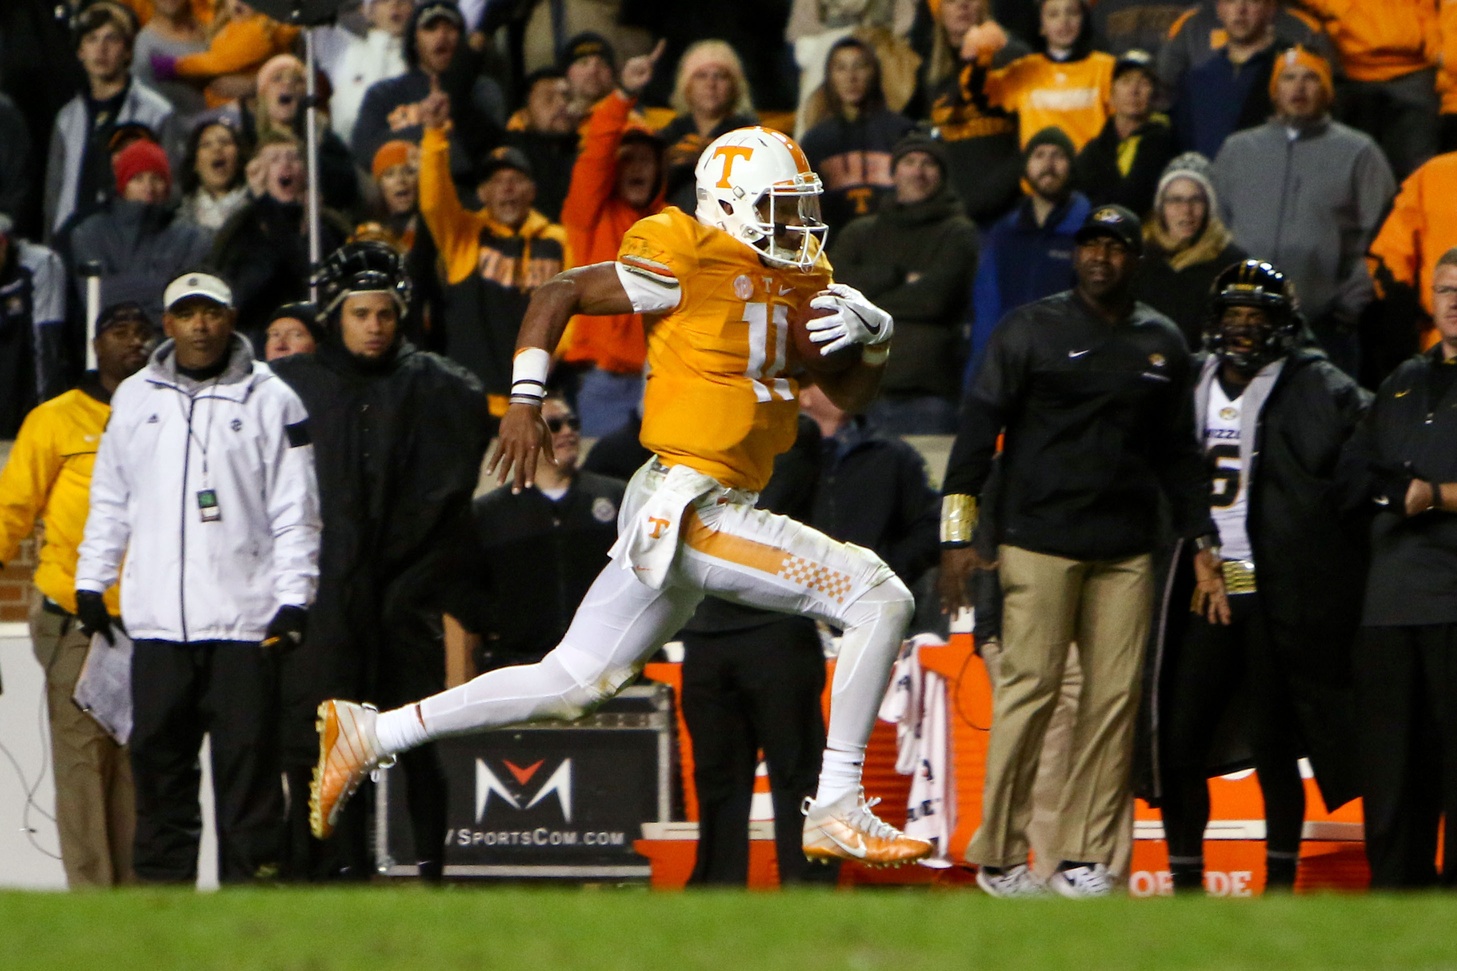 Nov 19, 2016; Knoxville, TN, USA; Tennessee Volunteers quarterback Joshua Dobbs (11) runs for a touchdown against the Missouri Tigers during the second half at Neyland Stadium. Tennessee won 63 to 37. Mandatory Credit: Randy Sartin-USA TODAY Sports